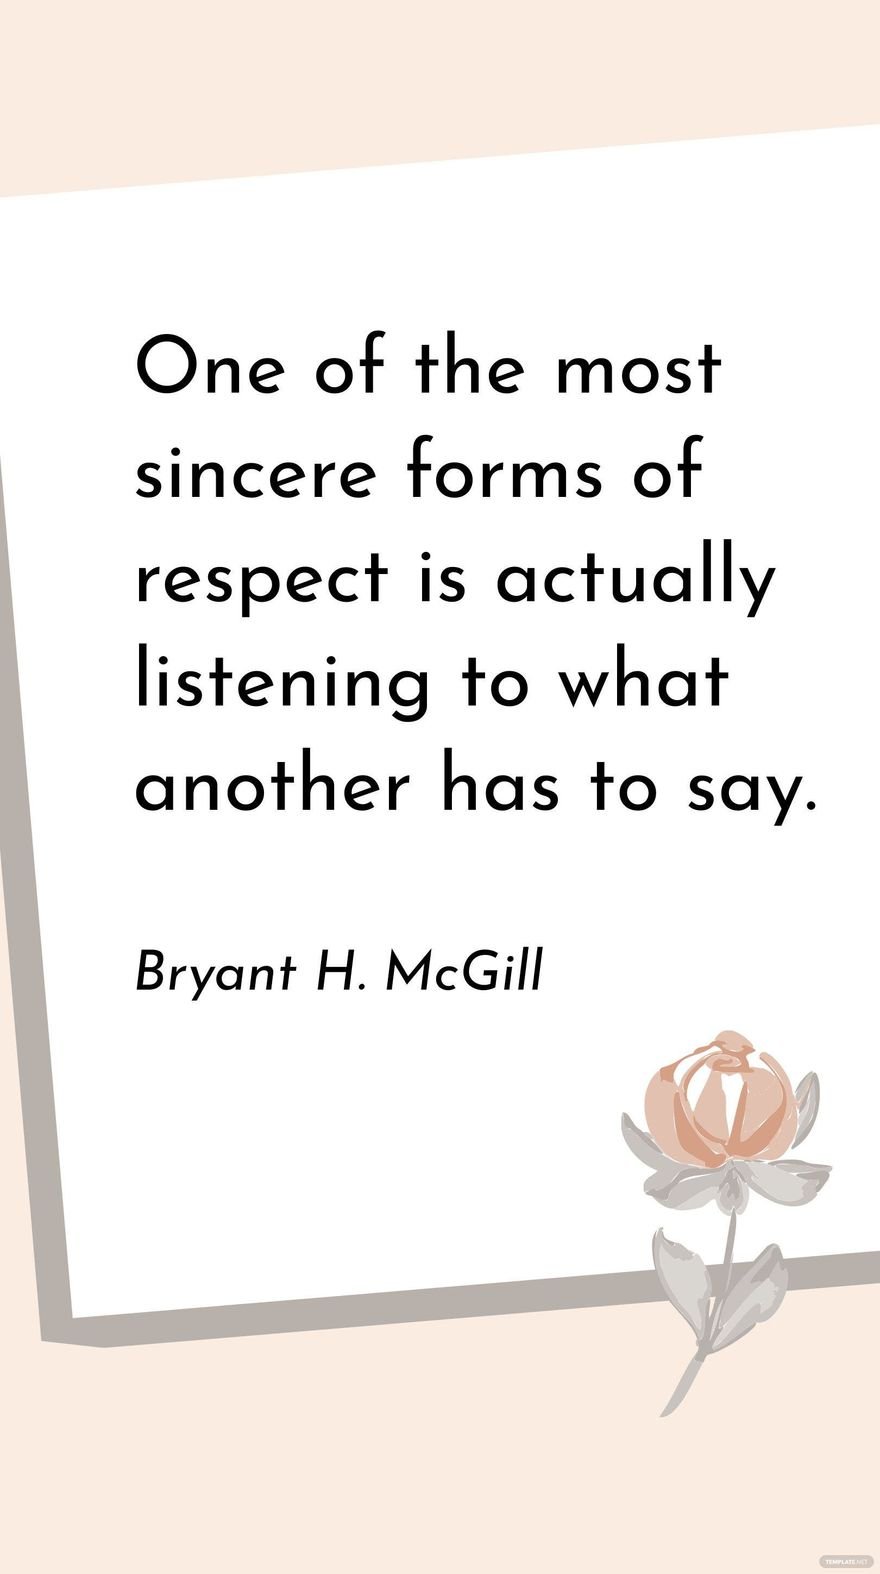 Bryant H. McGill - One of the most sincere forms of respect is actually listening to what another has to say.